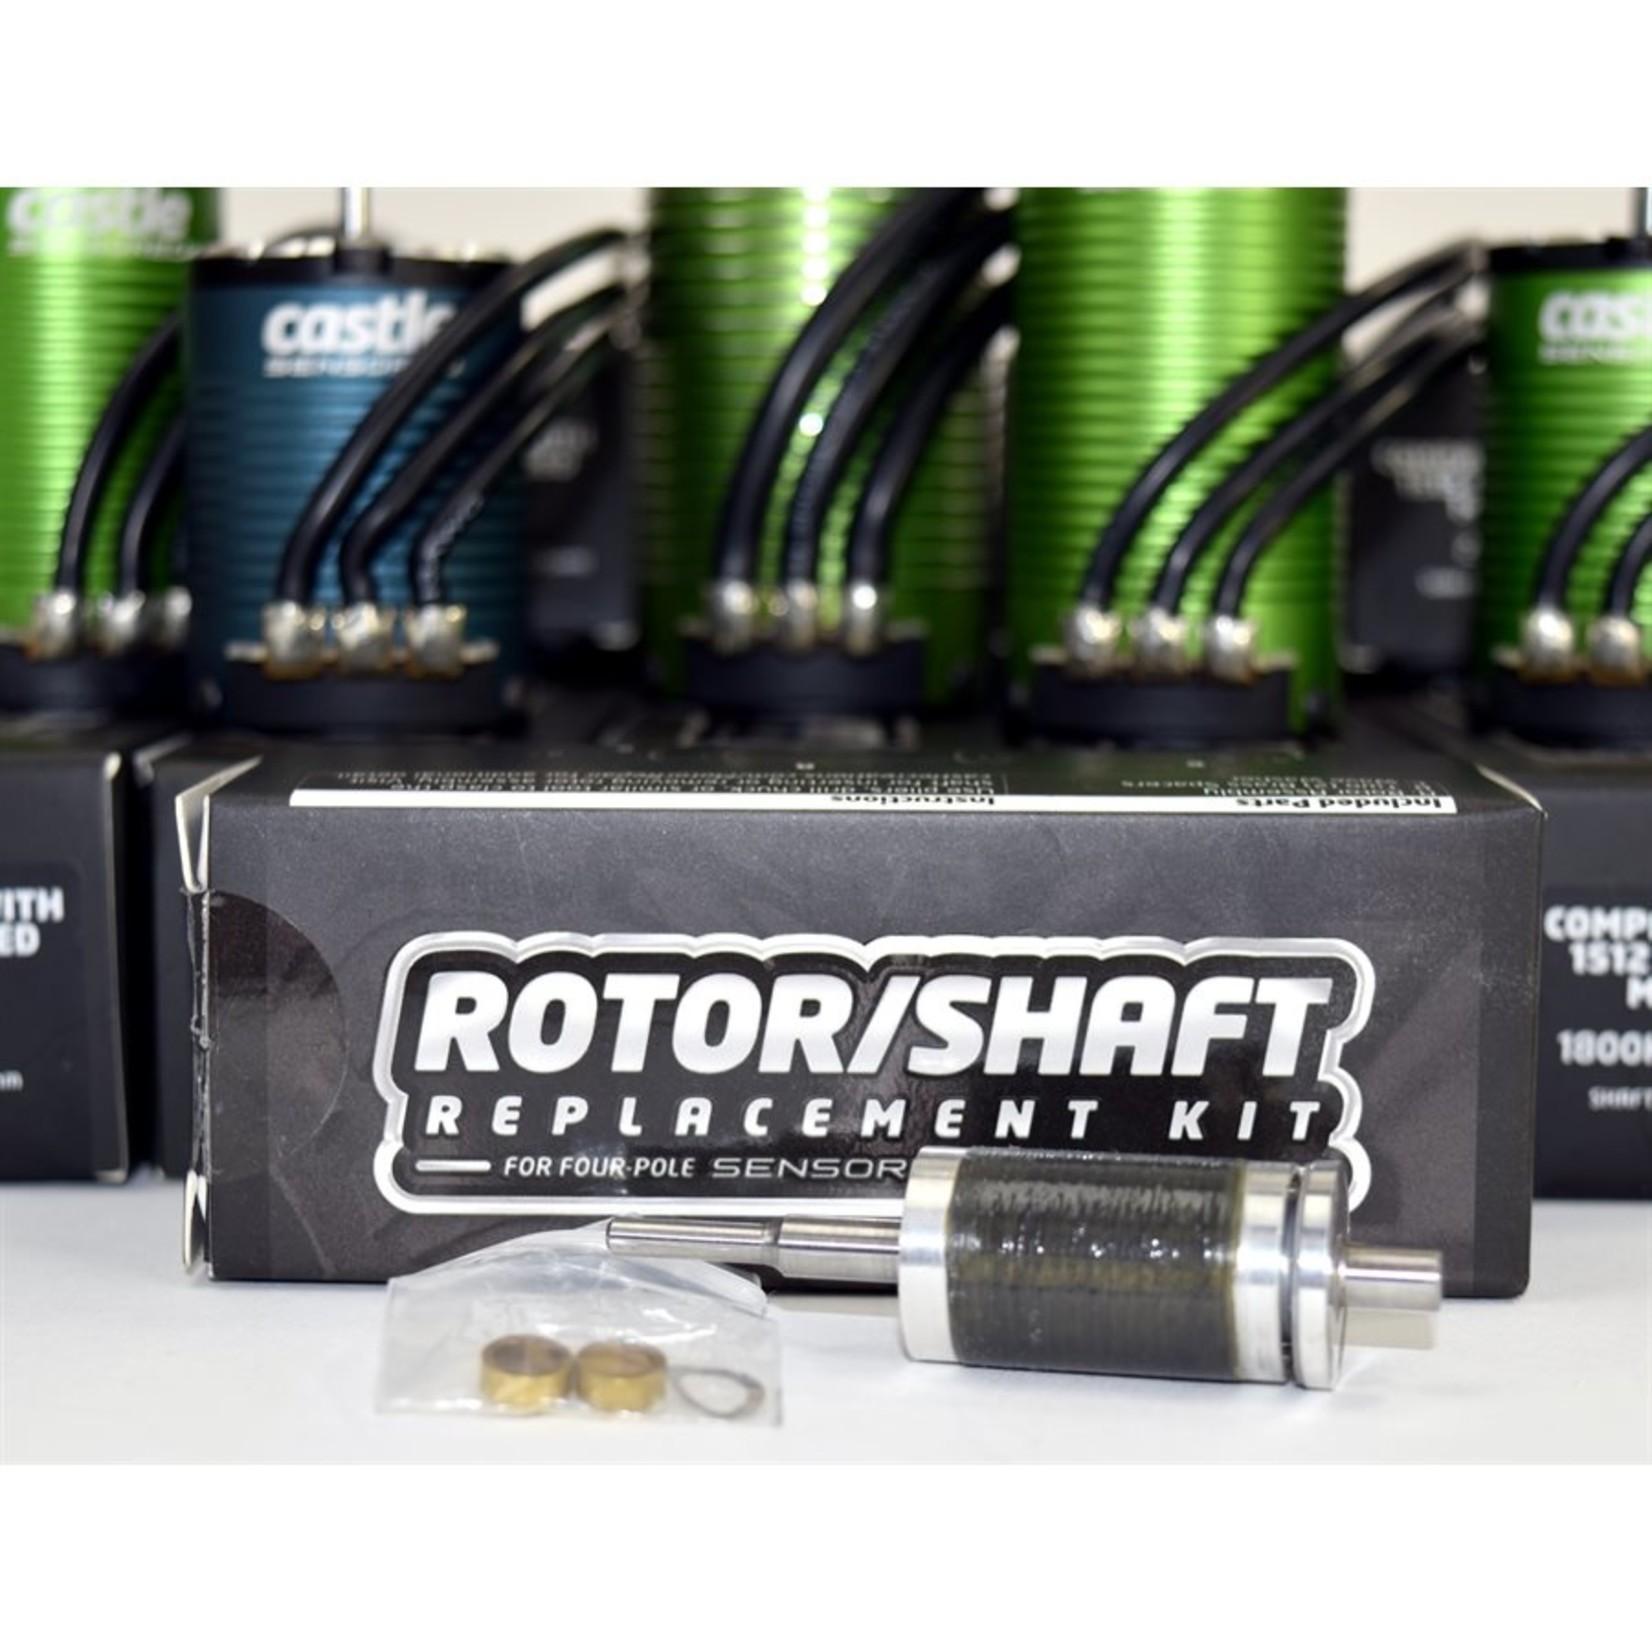 Castle Creations Rotor/Shaft Replacement Kit 1406-6900Kv